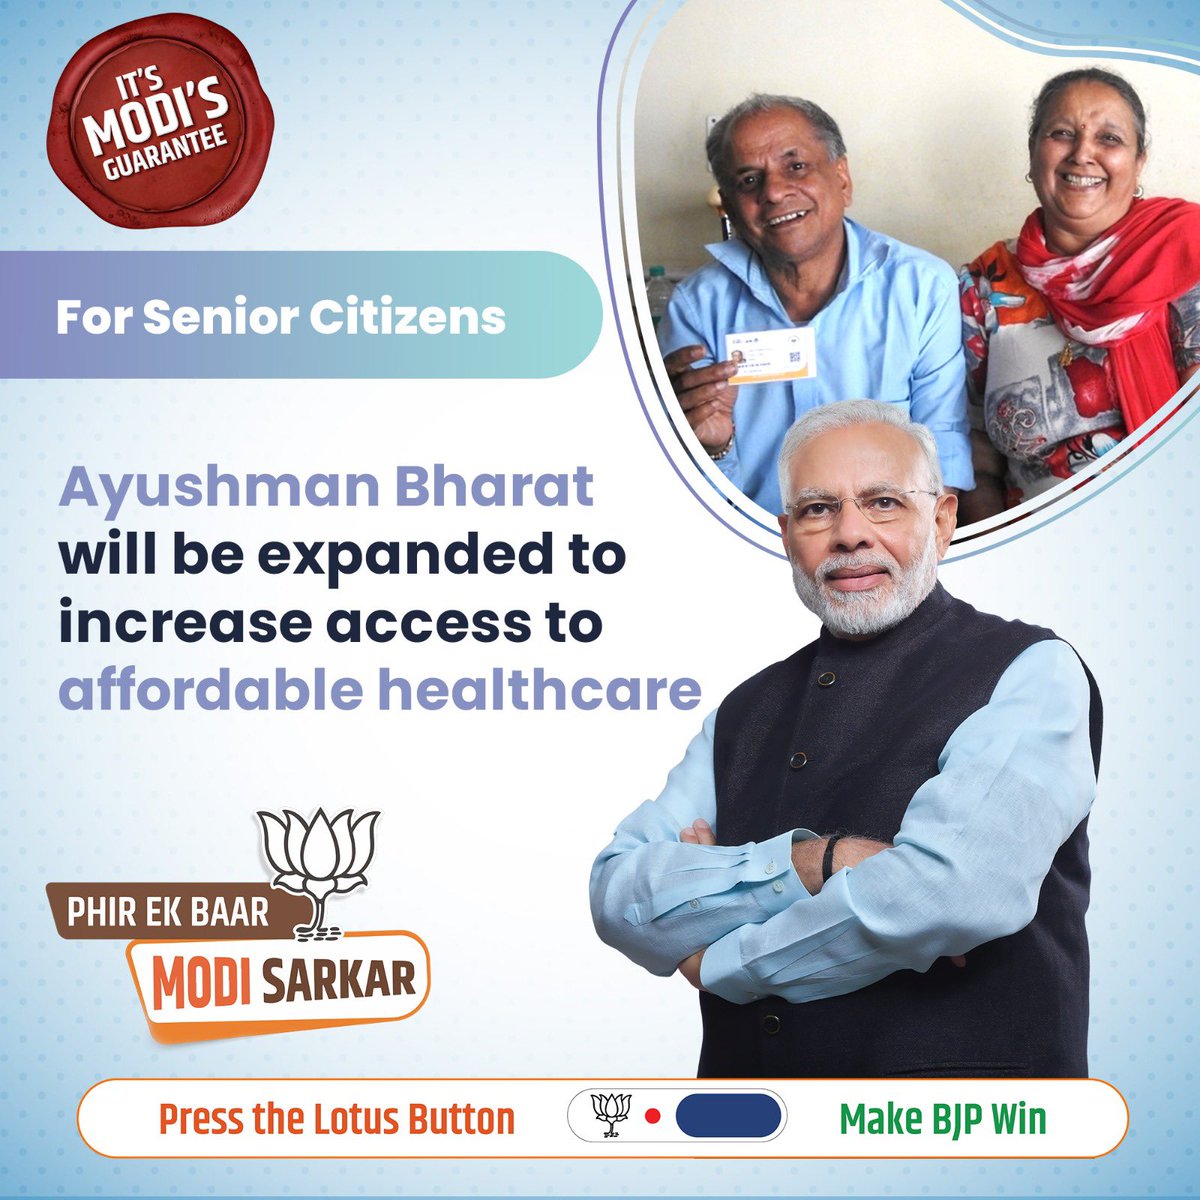 Under #ModiKiGuarantee, we are extending the Ayushman Bharat Yojana to include all senior citizens. This expansion ensures access to free and quality healthcare for our elders, honoring our commitment to their health and well-being.

@narendramodi @AmitShah @JPNadda @Dev_Fadnavis…